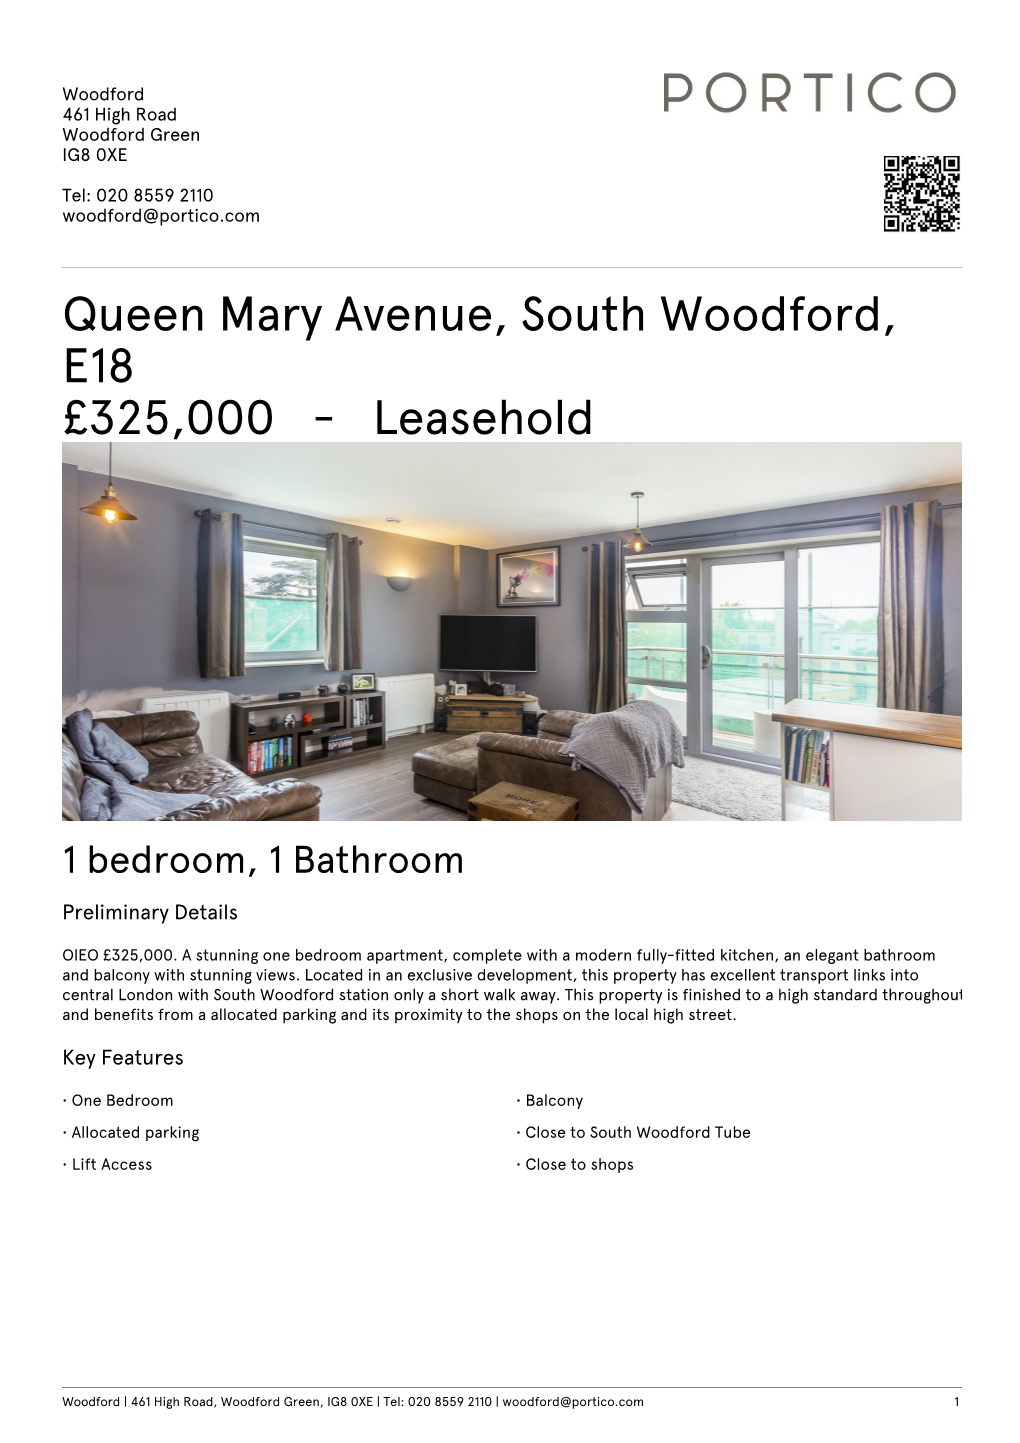 Queen Mary Avenue, South Woodford, E18 £325000